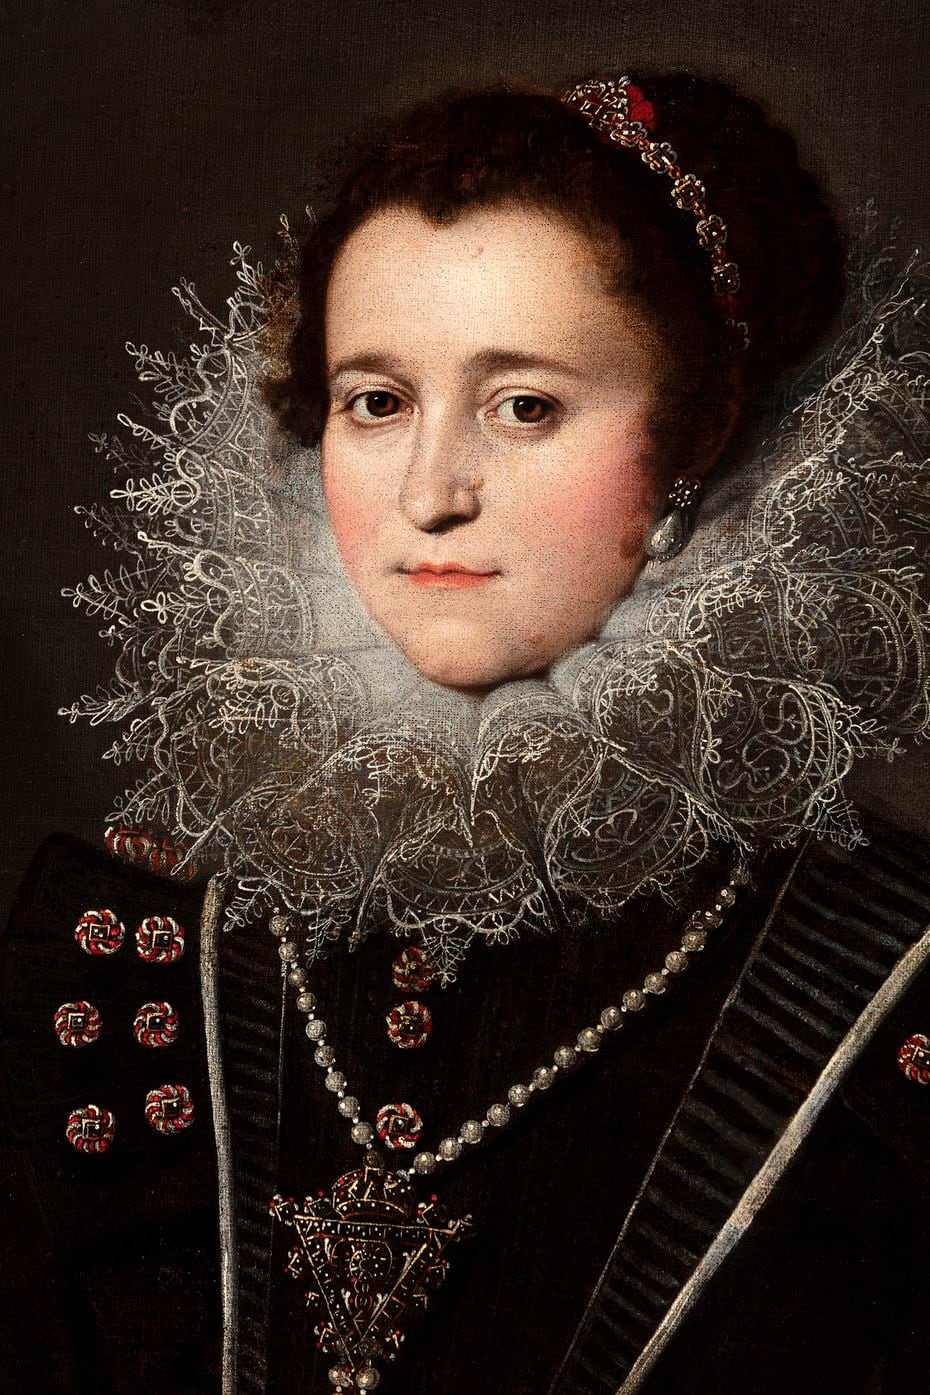 Earlier this year, the Meadows acquired Bartolomé González y Serrano's 1621 "Portrait of a Lady" in honor of Roglán.